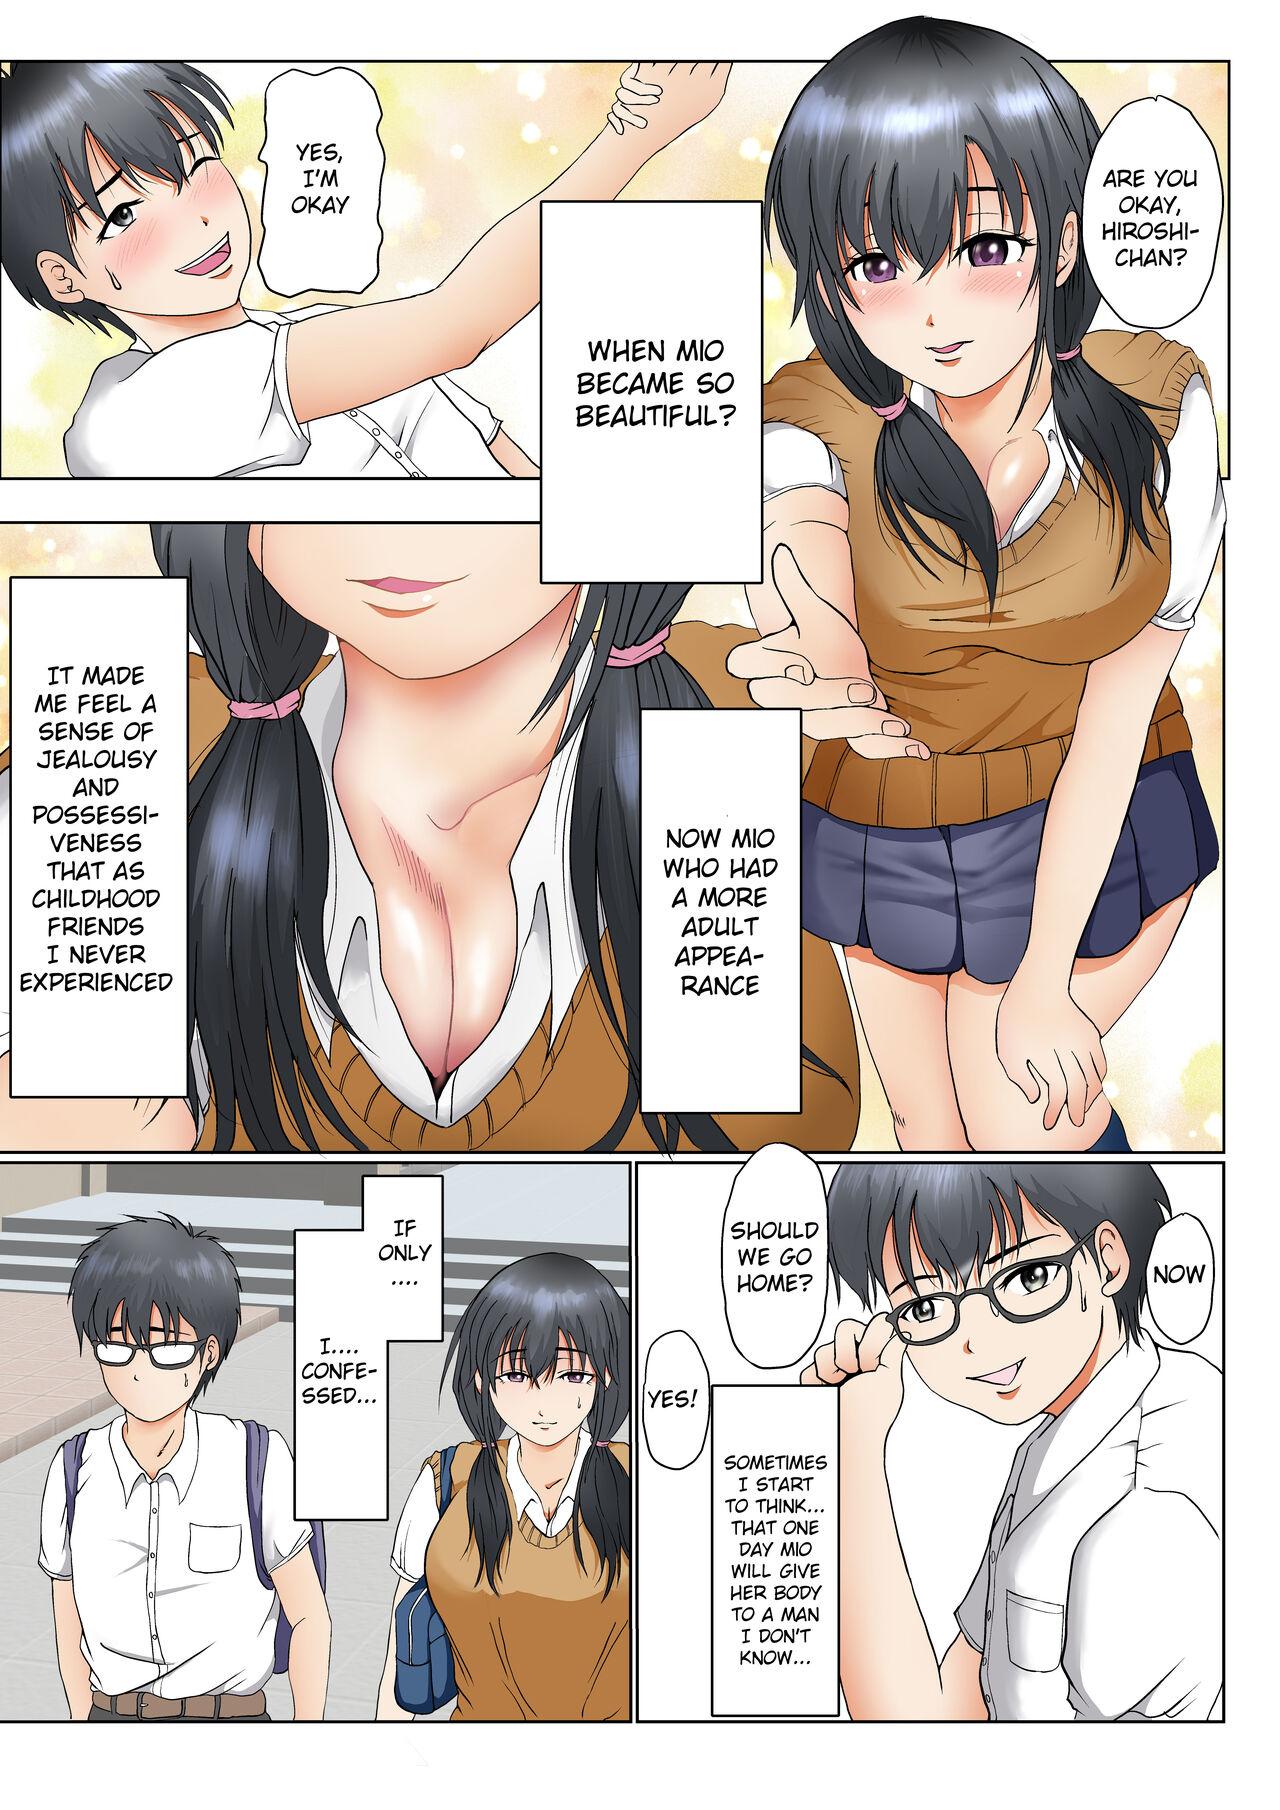 Nude The reason why the bond with my childhood friend is broken so easily - Original Cutie - Page 10